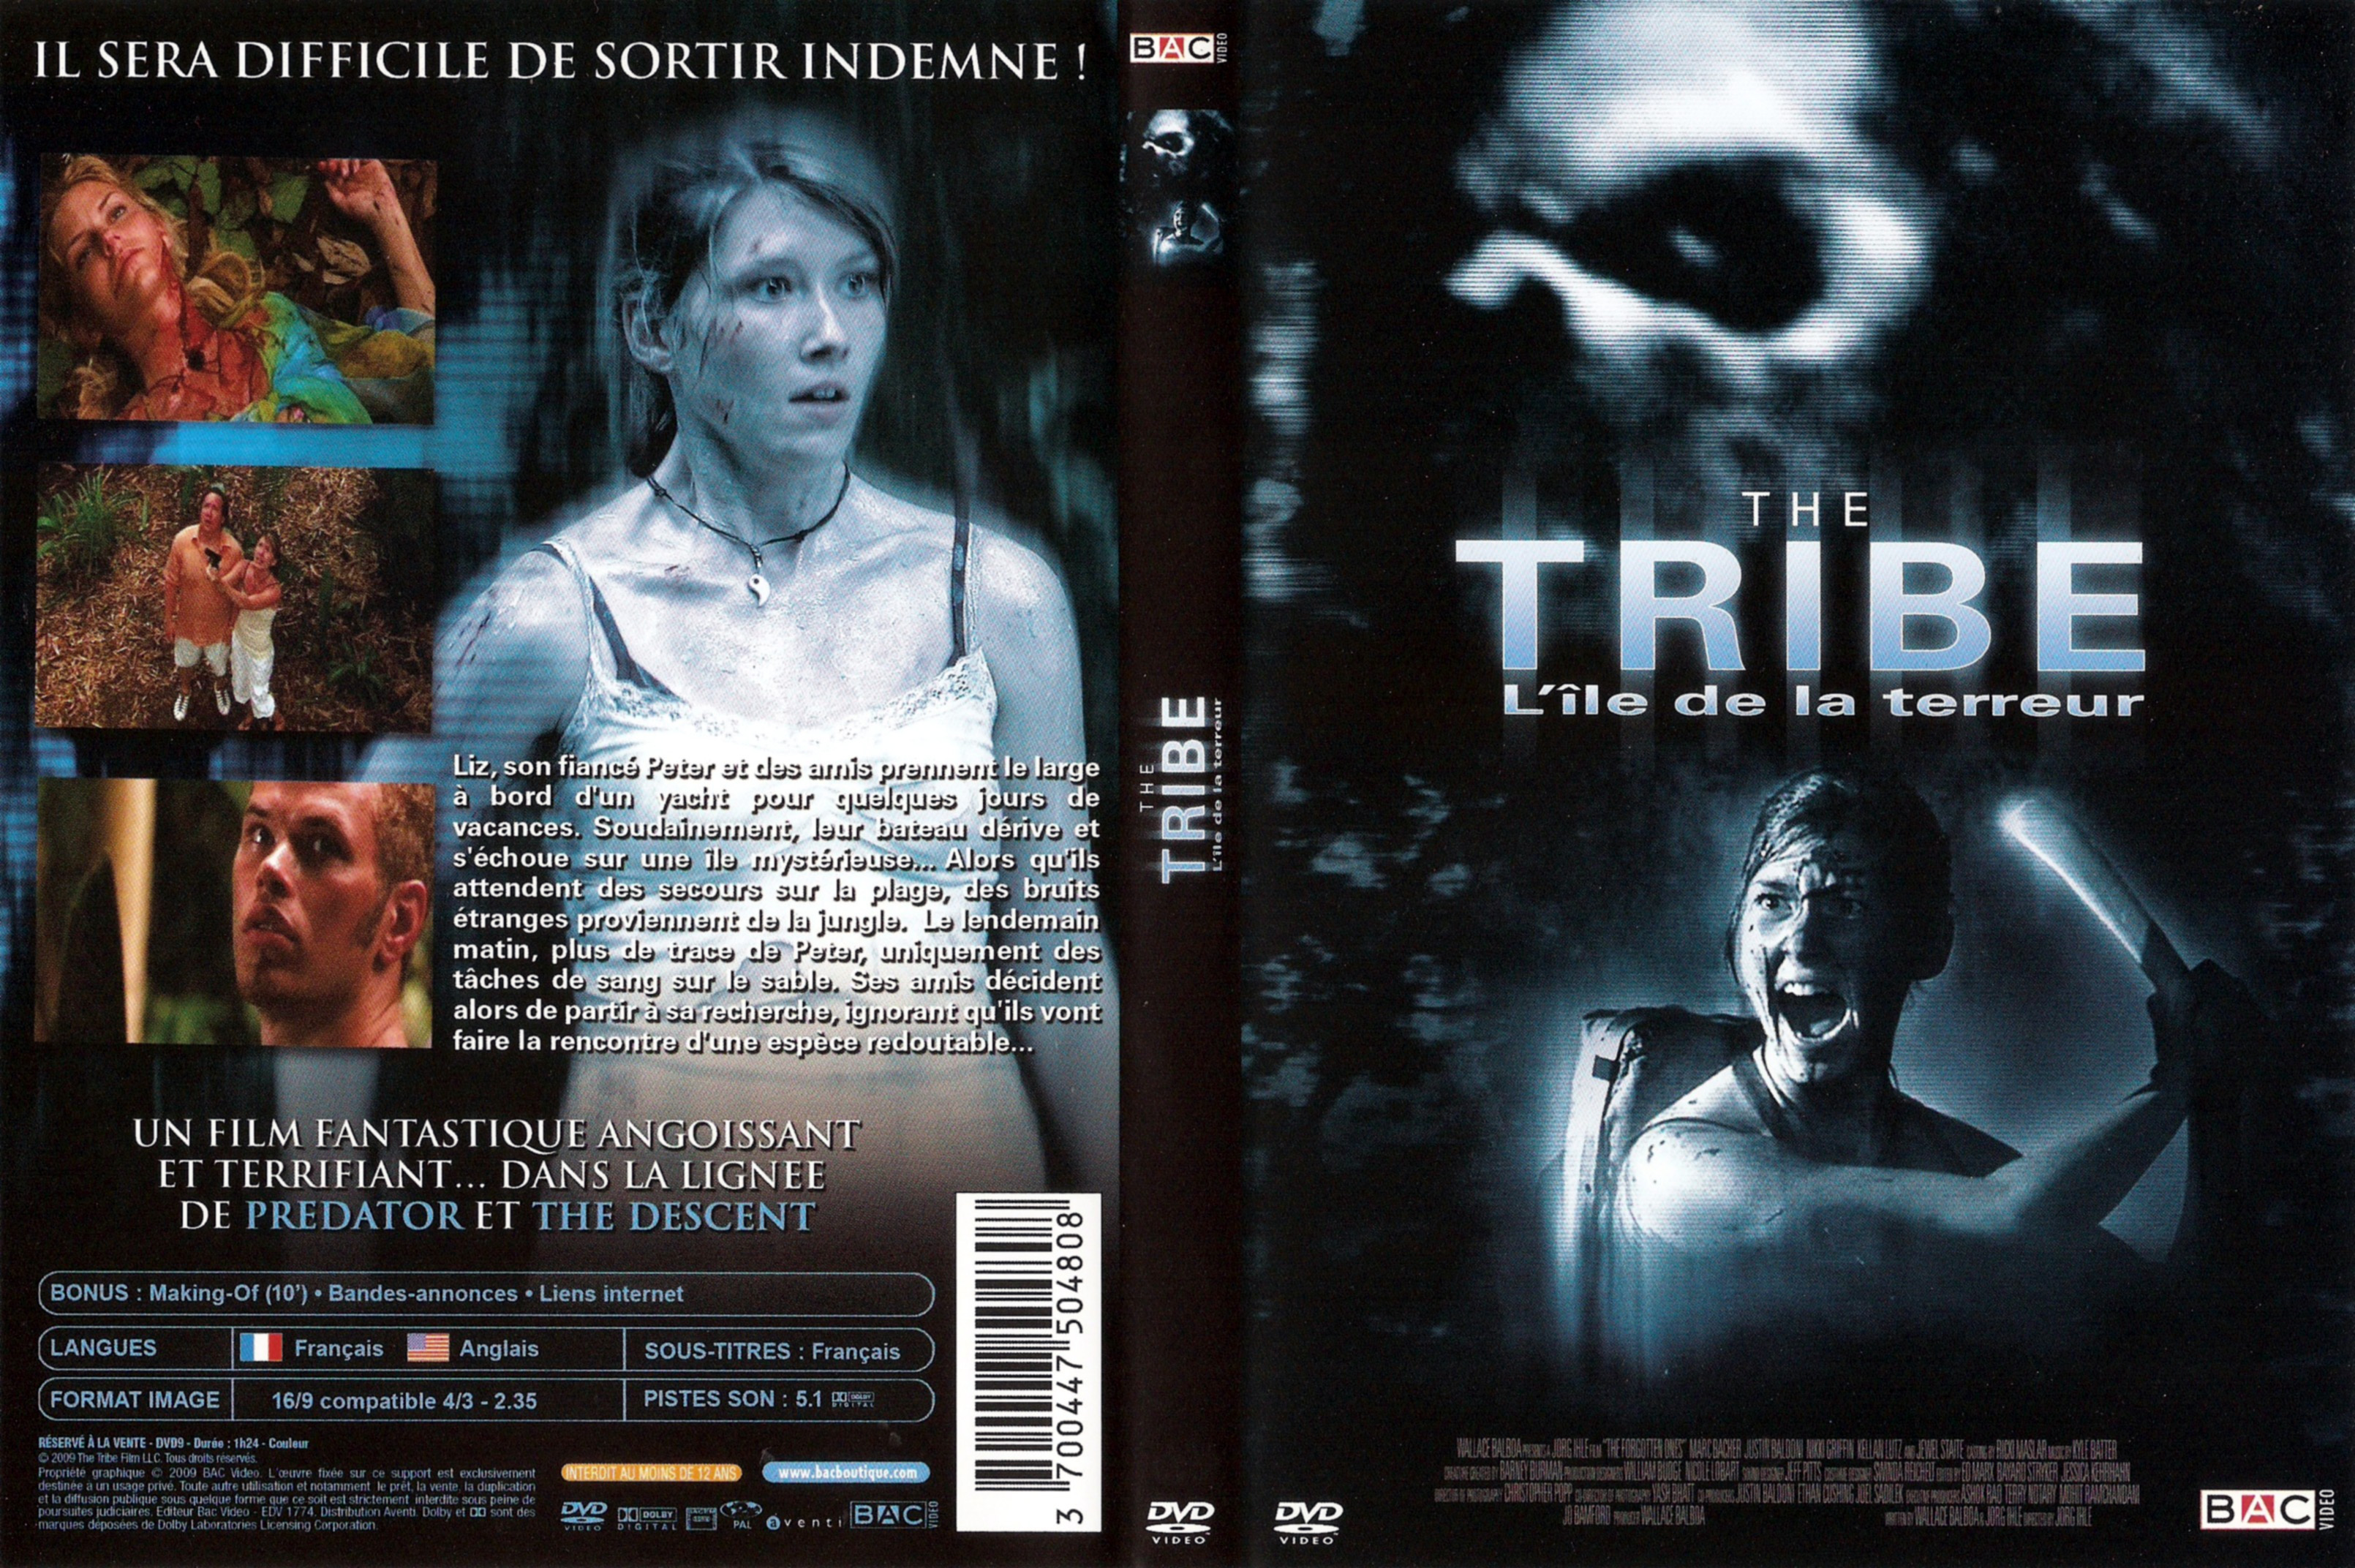 Jaquette DVD The tribe